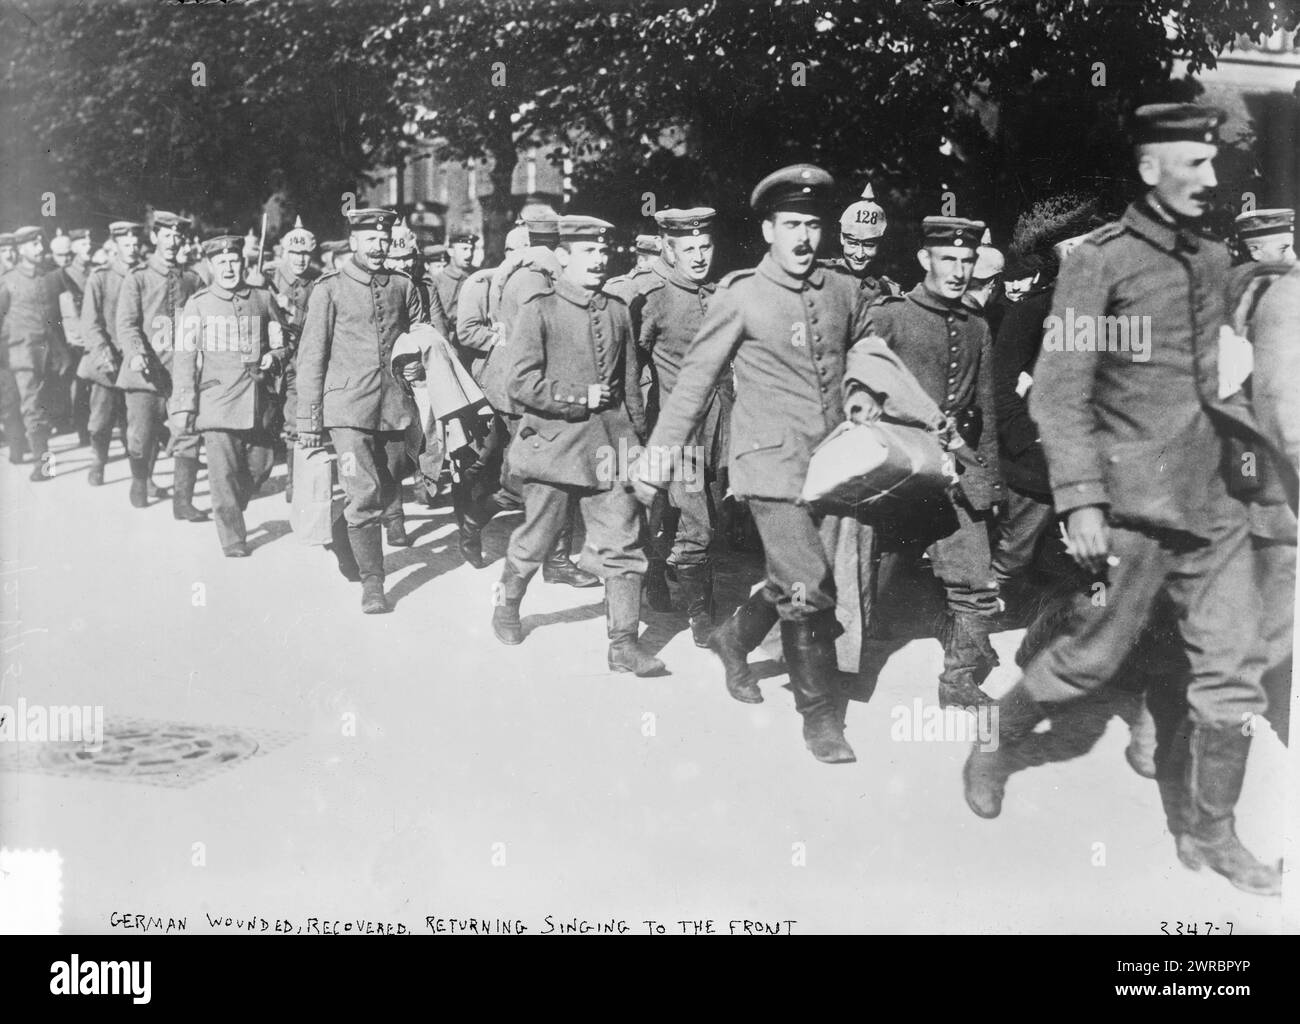 German wounded, recovered, returning singing to the front, Photograph shows German soldiers marching and singing in the street during World War I., between ca. 1914 and ca. 1915, World War, 1914-1918, Glass negatives, 1 negative: glass Stock Photo